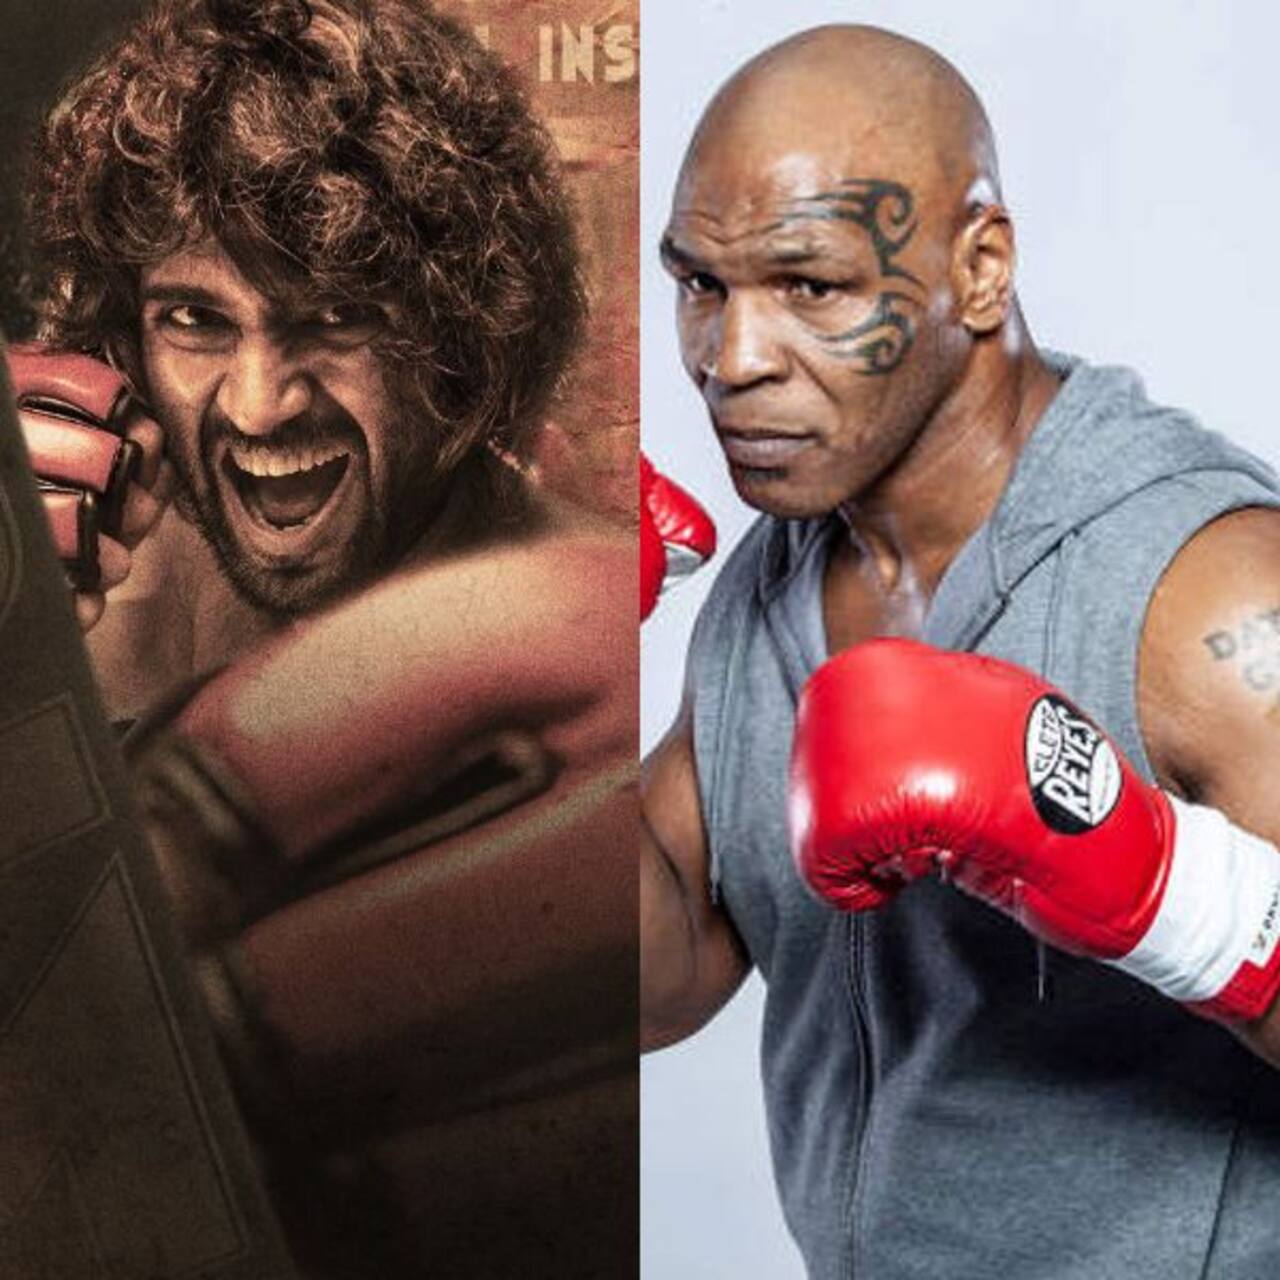 Liger: Vijay Deverakonda is excited to shoot with Mike Tyson but hopes 'none of his punches connect' – Here's why [EXCLUSIVE]